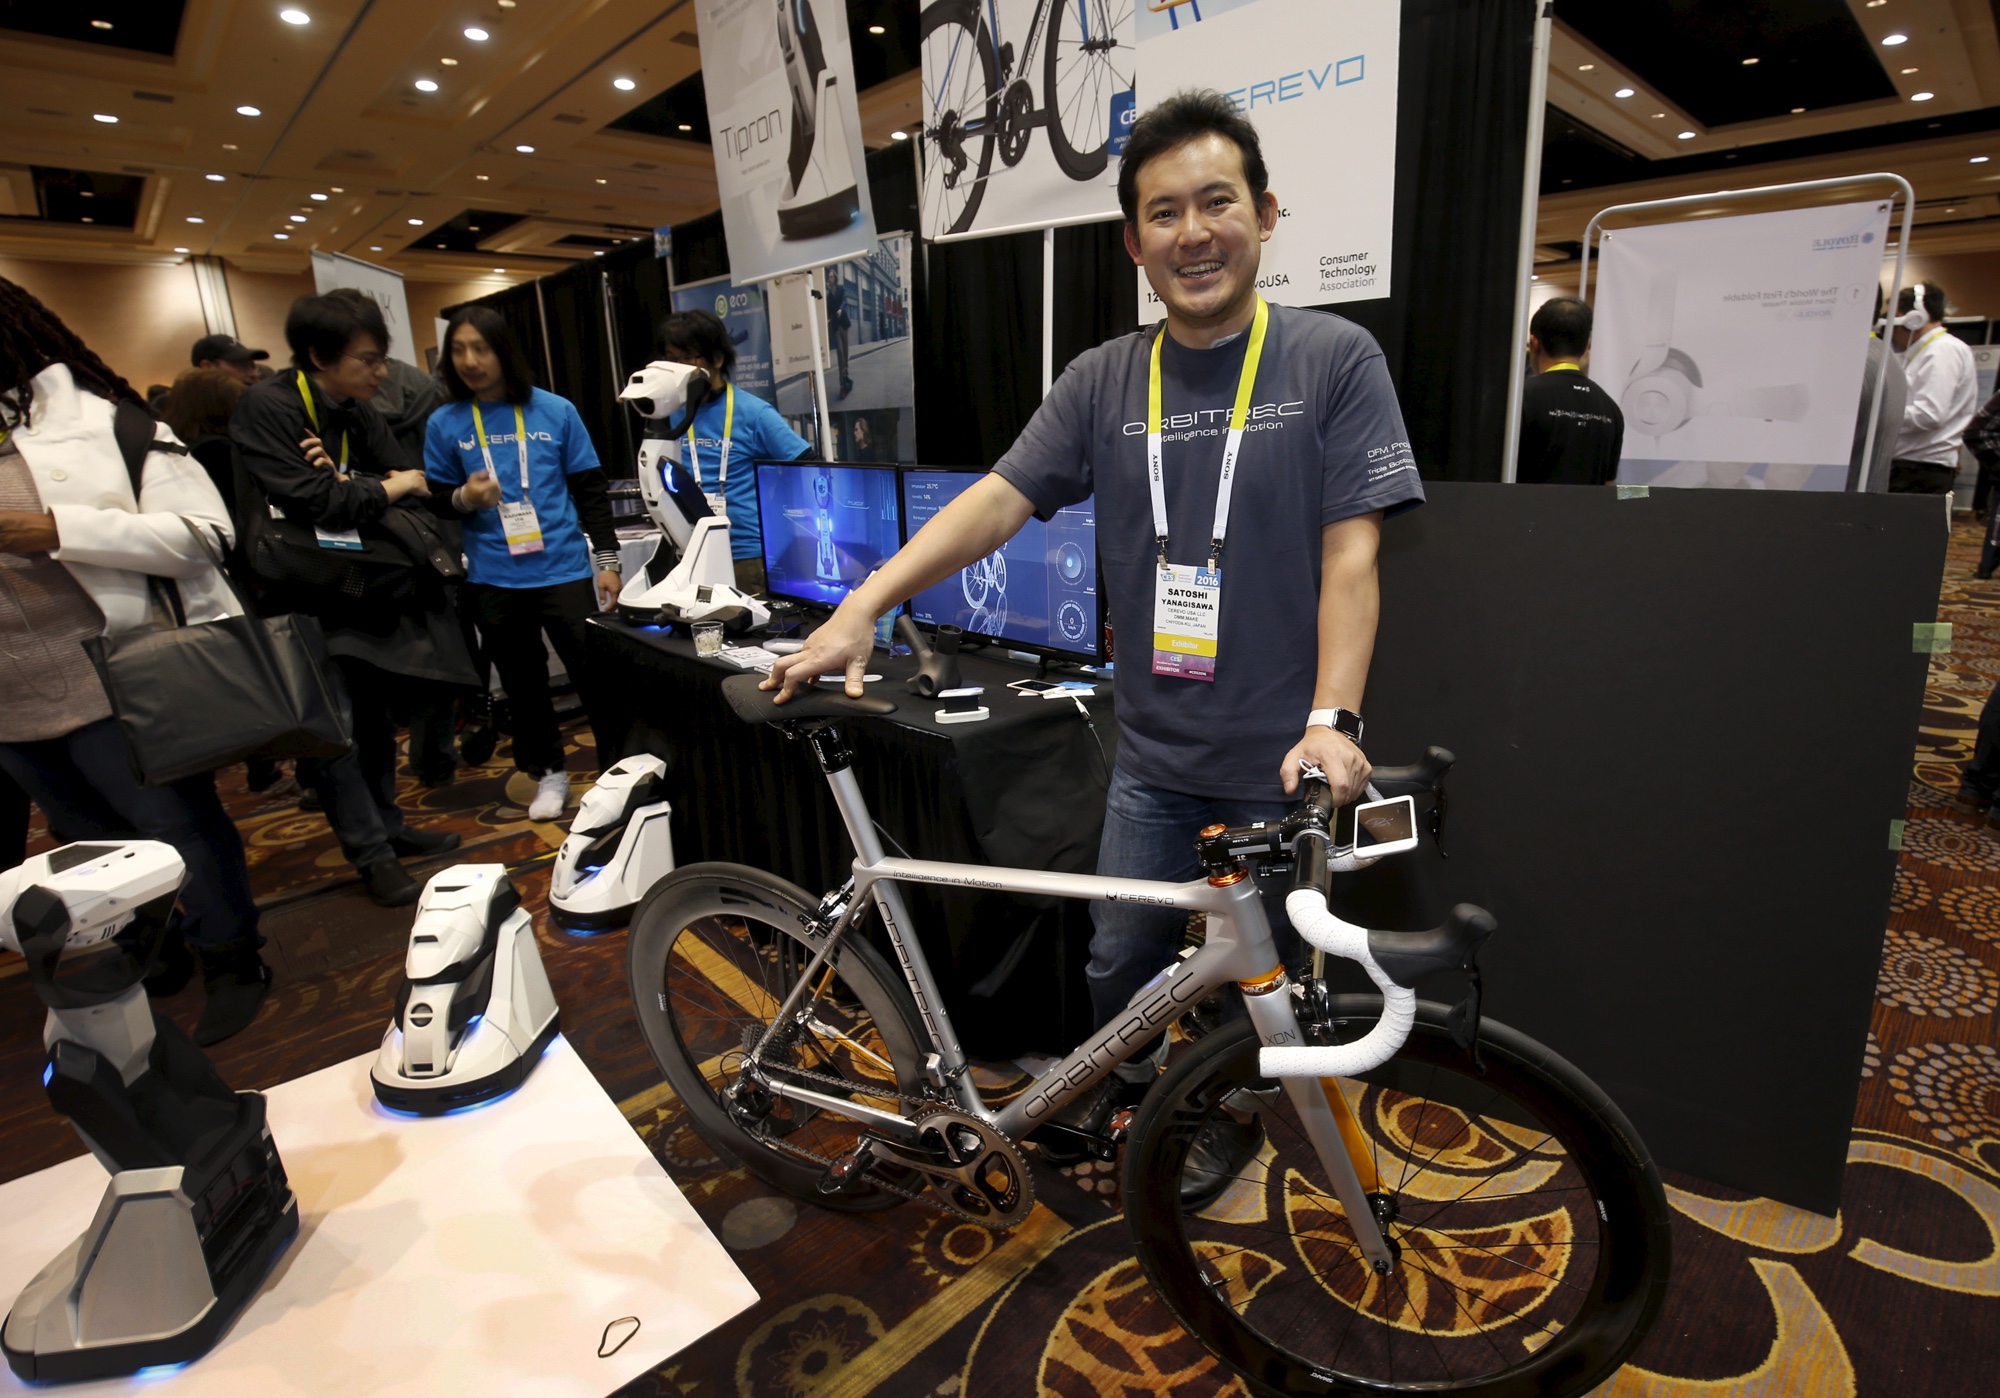 Satoshi Yanagisawa of Japan displays the Orbitrec, a connected 3D printed bicycle by Cerevo, during "CES Unveiled," a preview event of the 2016 International CES trade show, in Las Vegas, Nevada January 4, 2016. The bicycle features 3D printed titanium joints, carbon fiber tubes and a built in sensor module that sends a variety of information to a smartphone. REUTERS